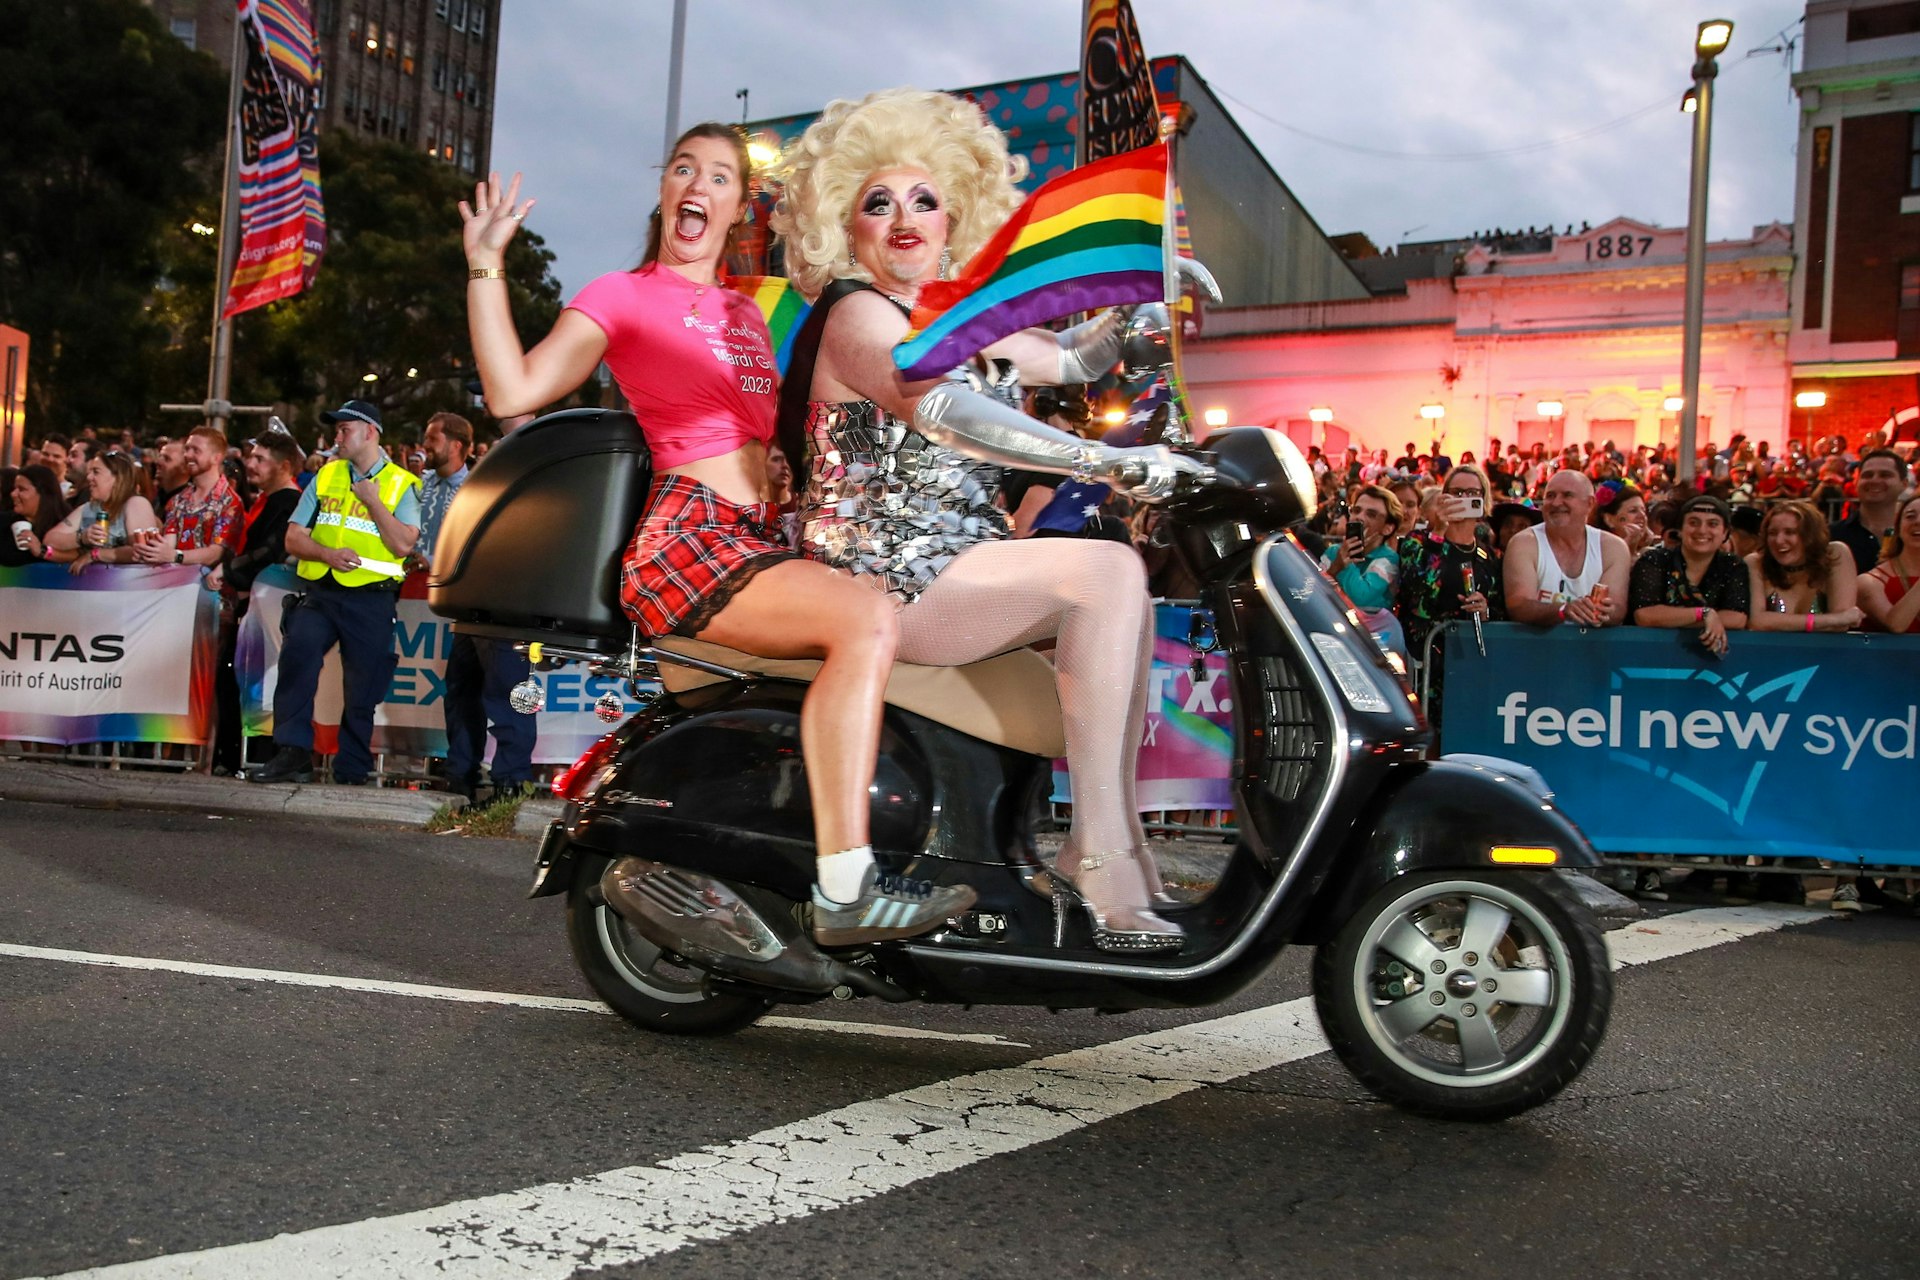 A drag queen and passenger on a motorcycle at Sydney Gay & Lesbian Mardi Gras, Sydney, New South Wales, Australia